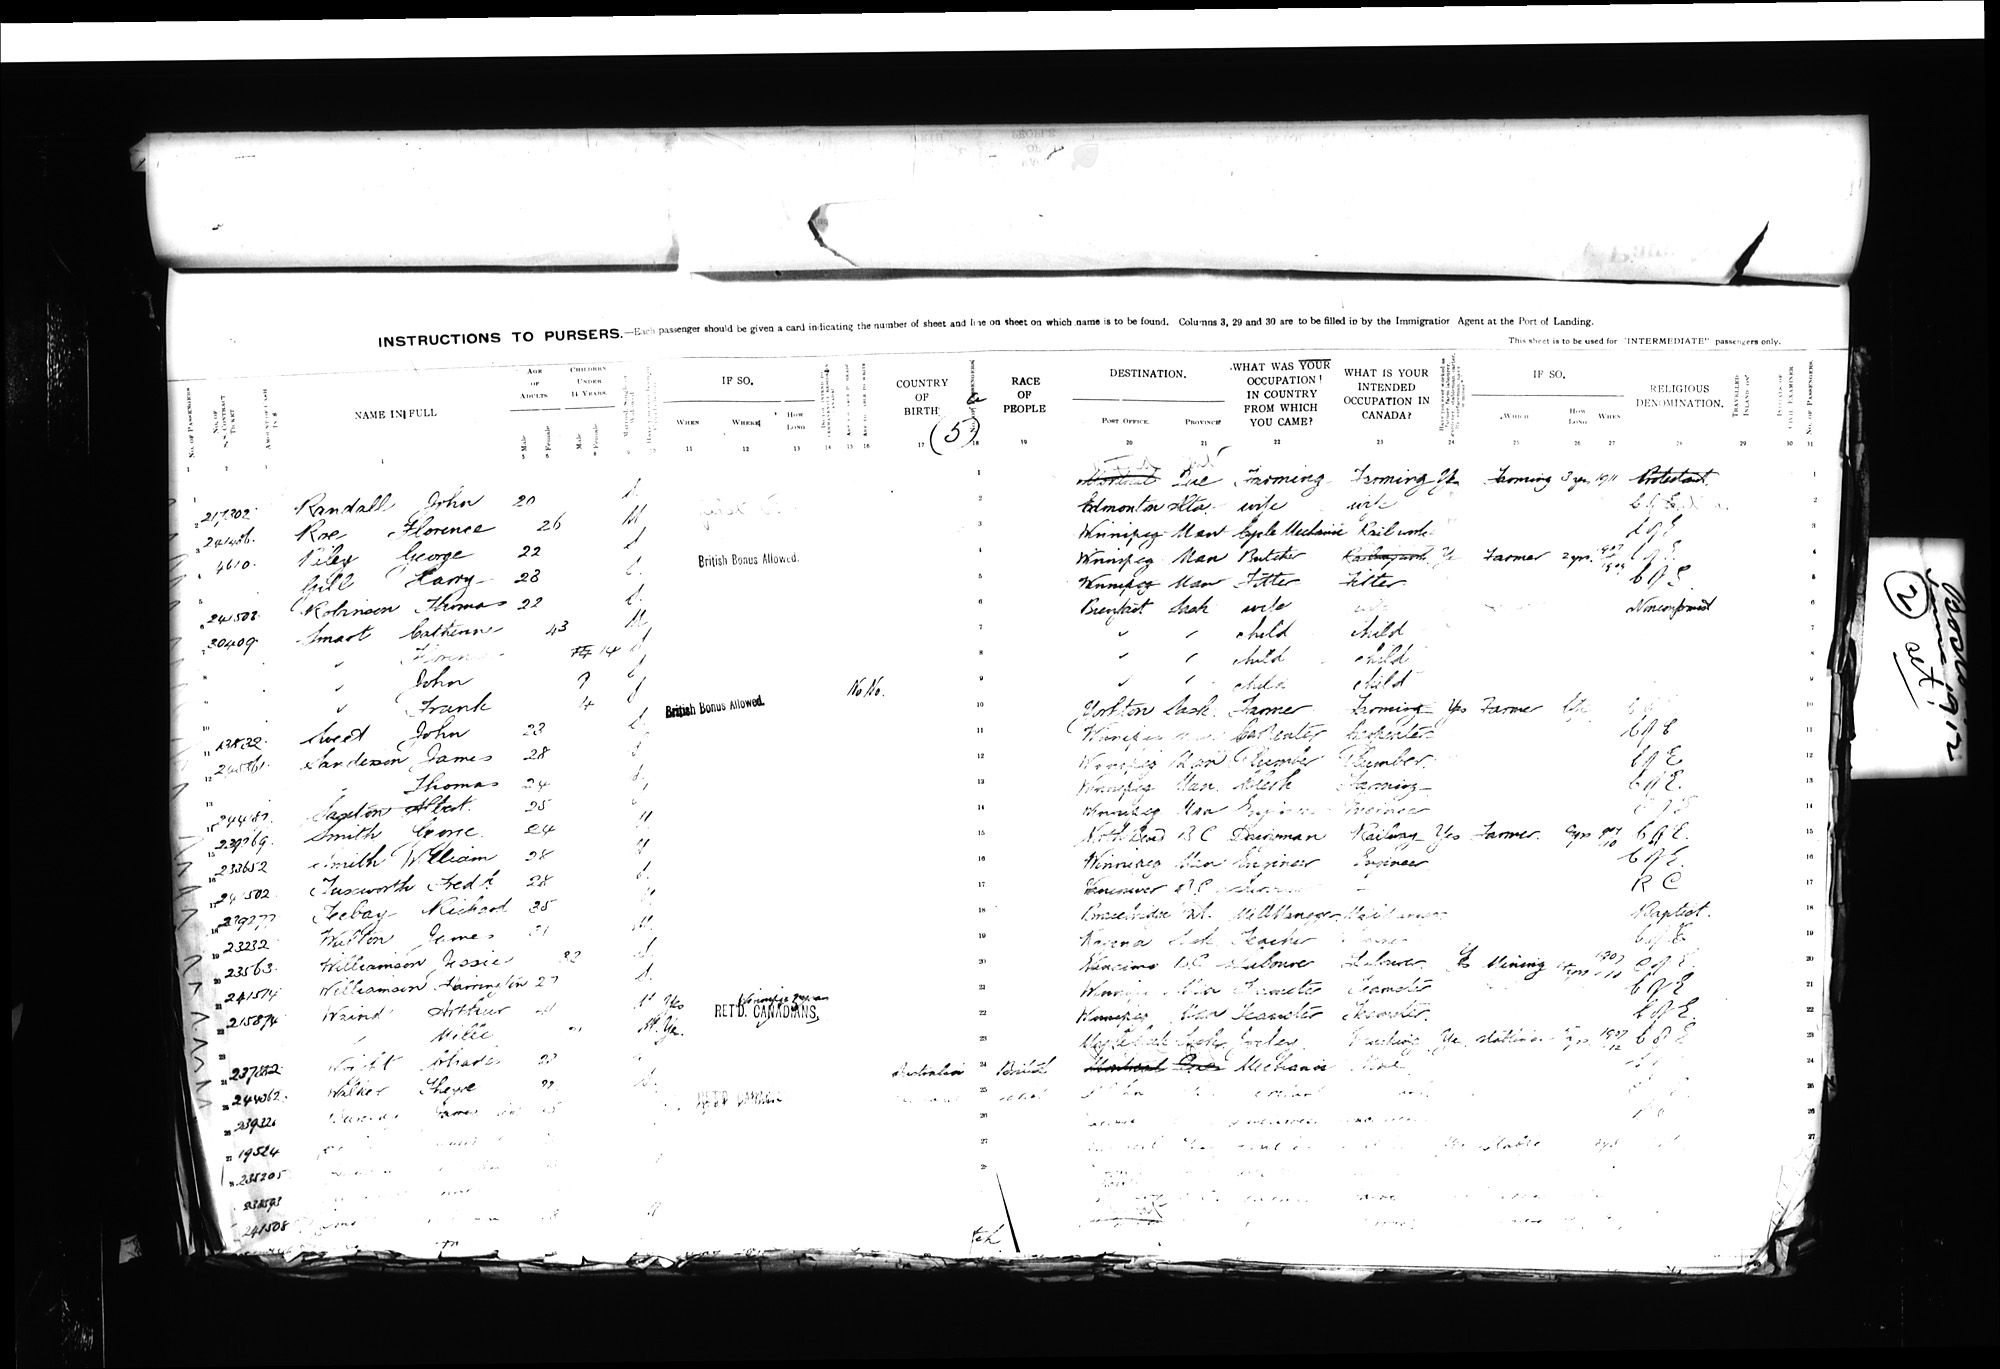 Digitized page of Passenger Lists for Image No.: CANIMM1913PLIST_0000406960-00151